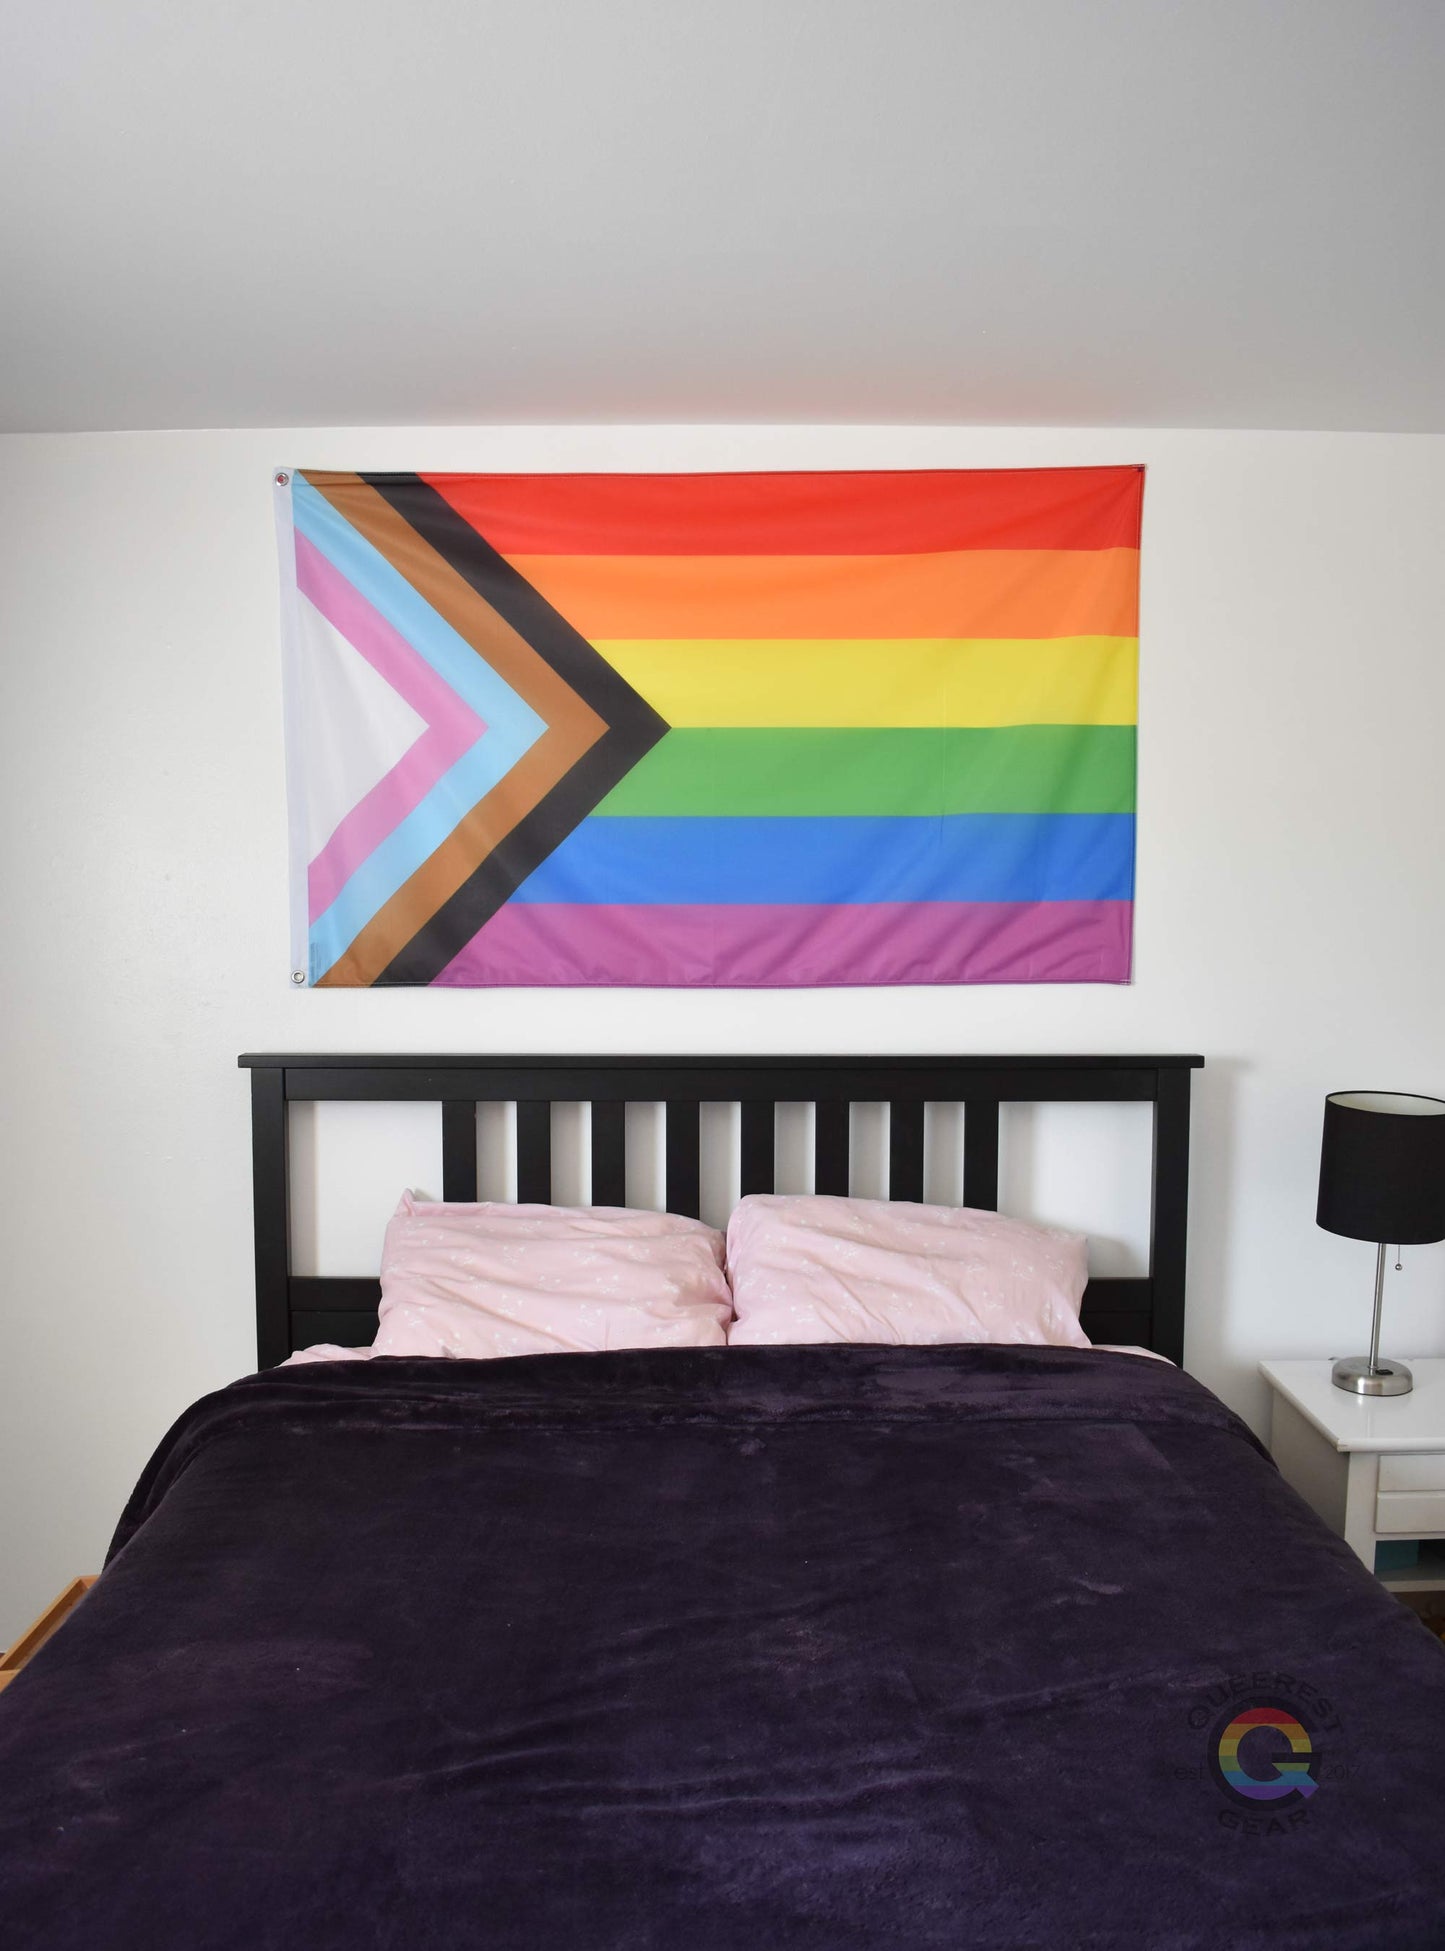 3’x5’ progress pride flag hanging horizontally on the wall of a bedroom centered above a bed with a purple blanket